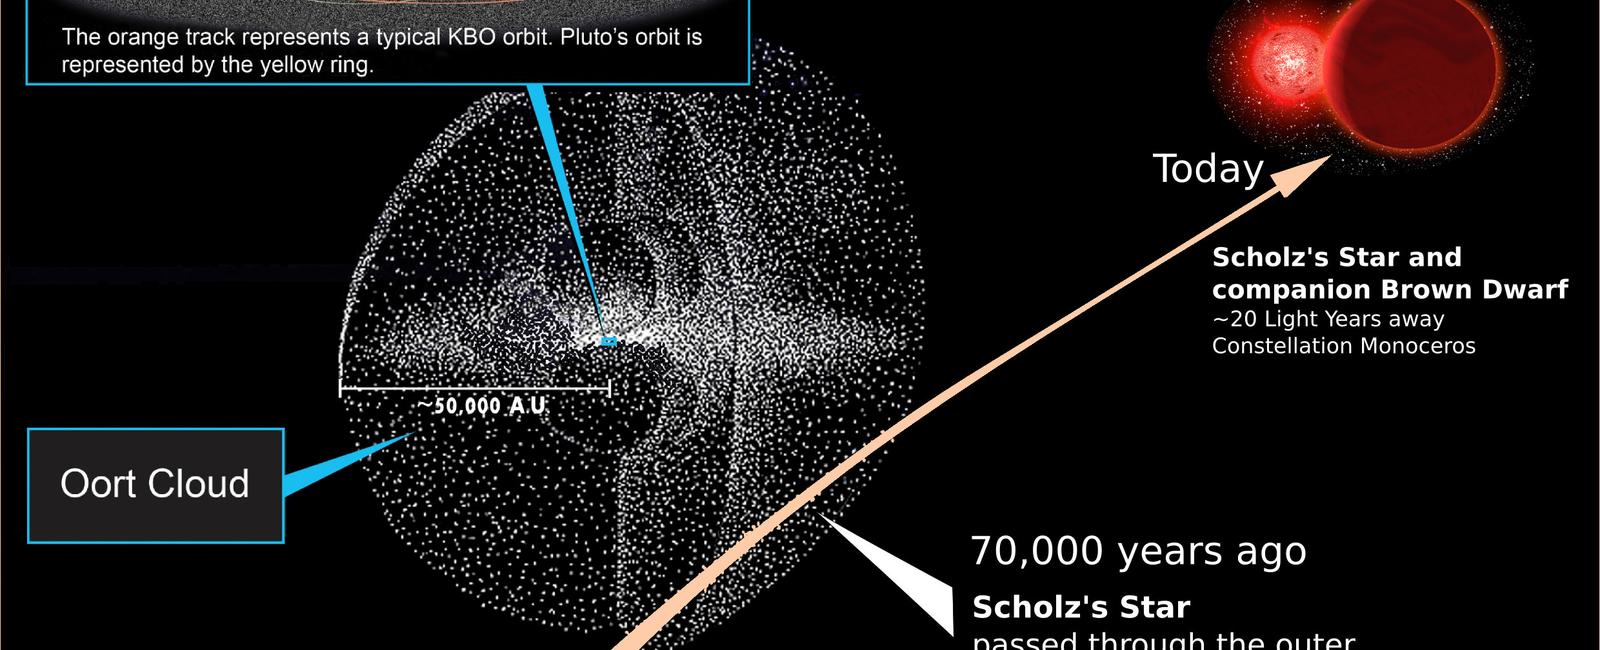 The most distant region of the solar system is called the oort cloud which is thought to be a giant spherical shell that surrounds the rest of the solar system